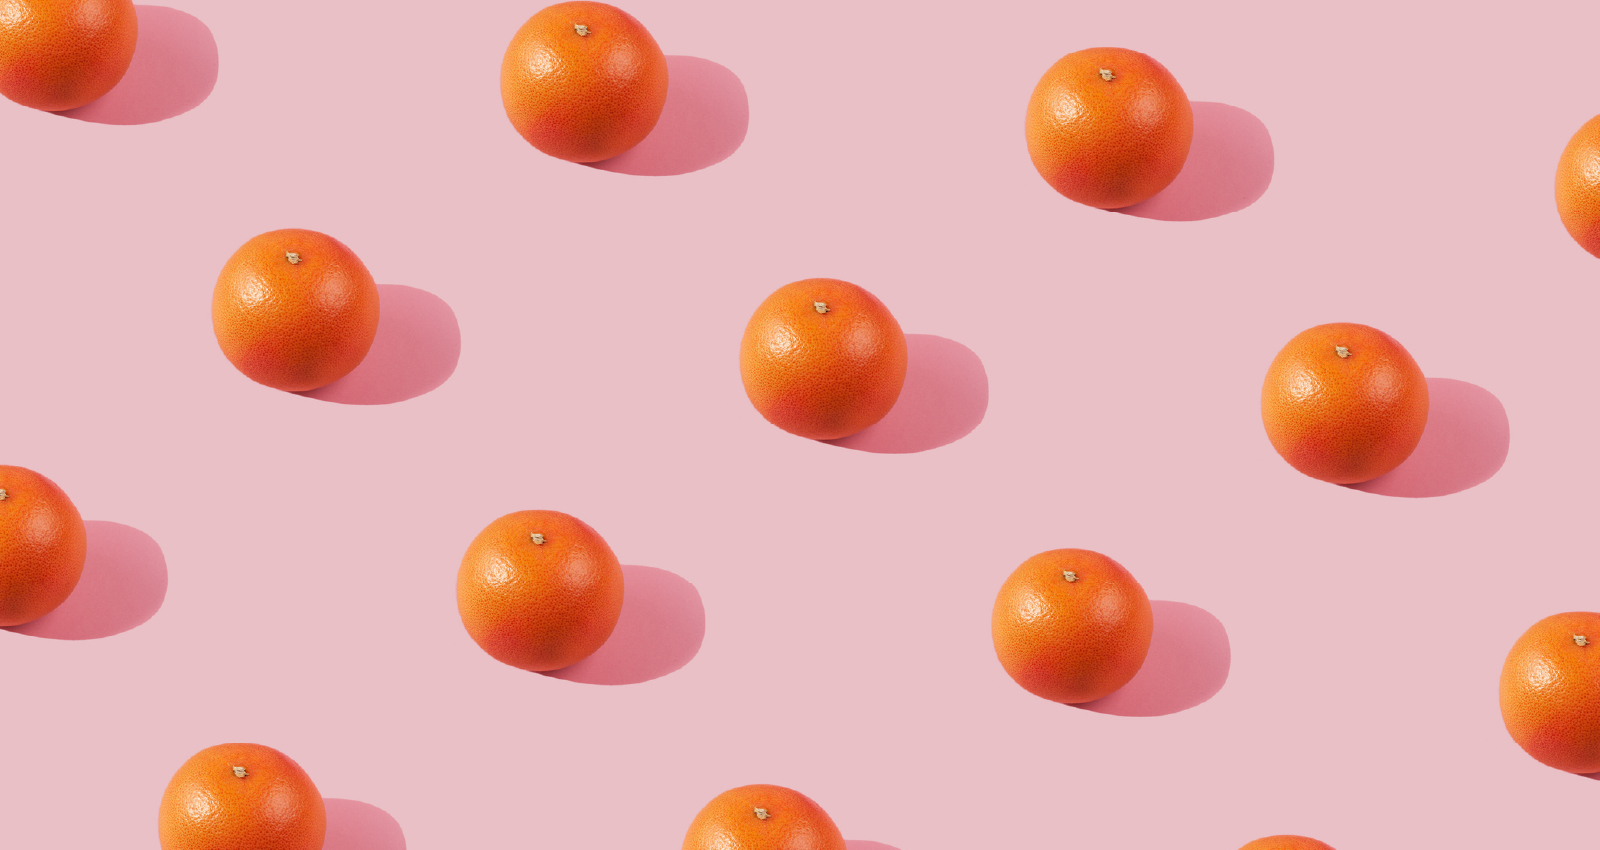 Image of clementine grid on pink background